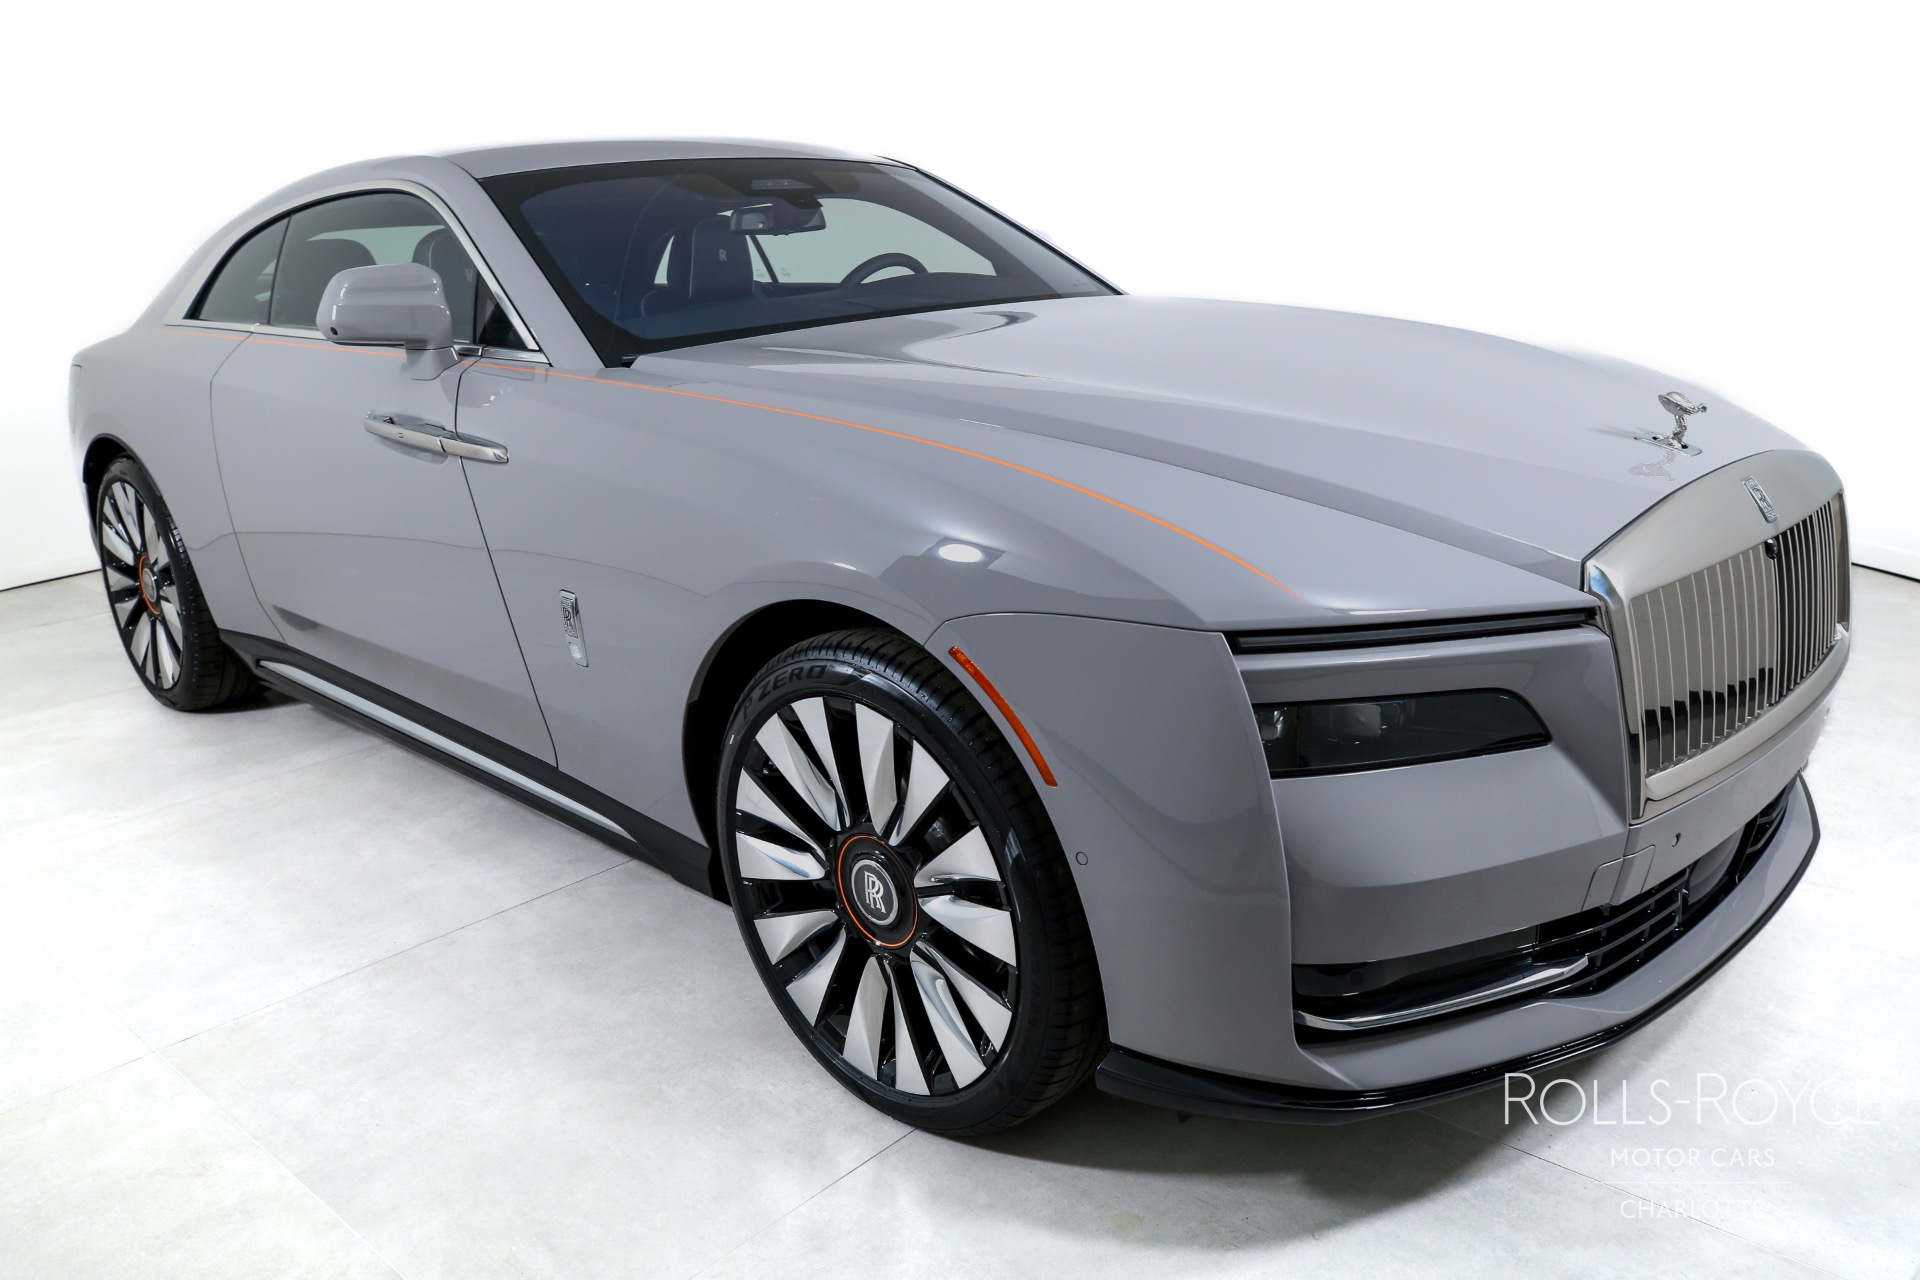 2024 Rolls-Royce Spectre Interior in Many Colors Photo Gallery